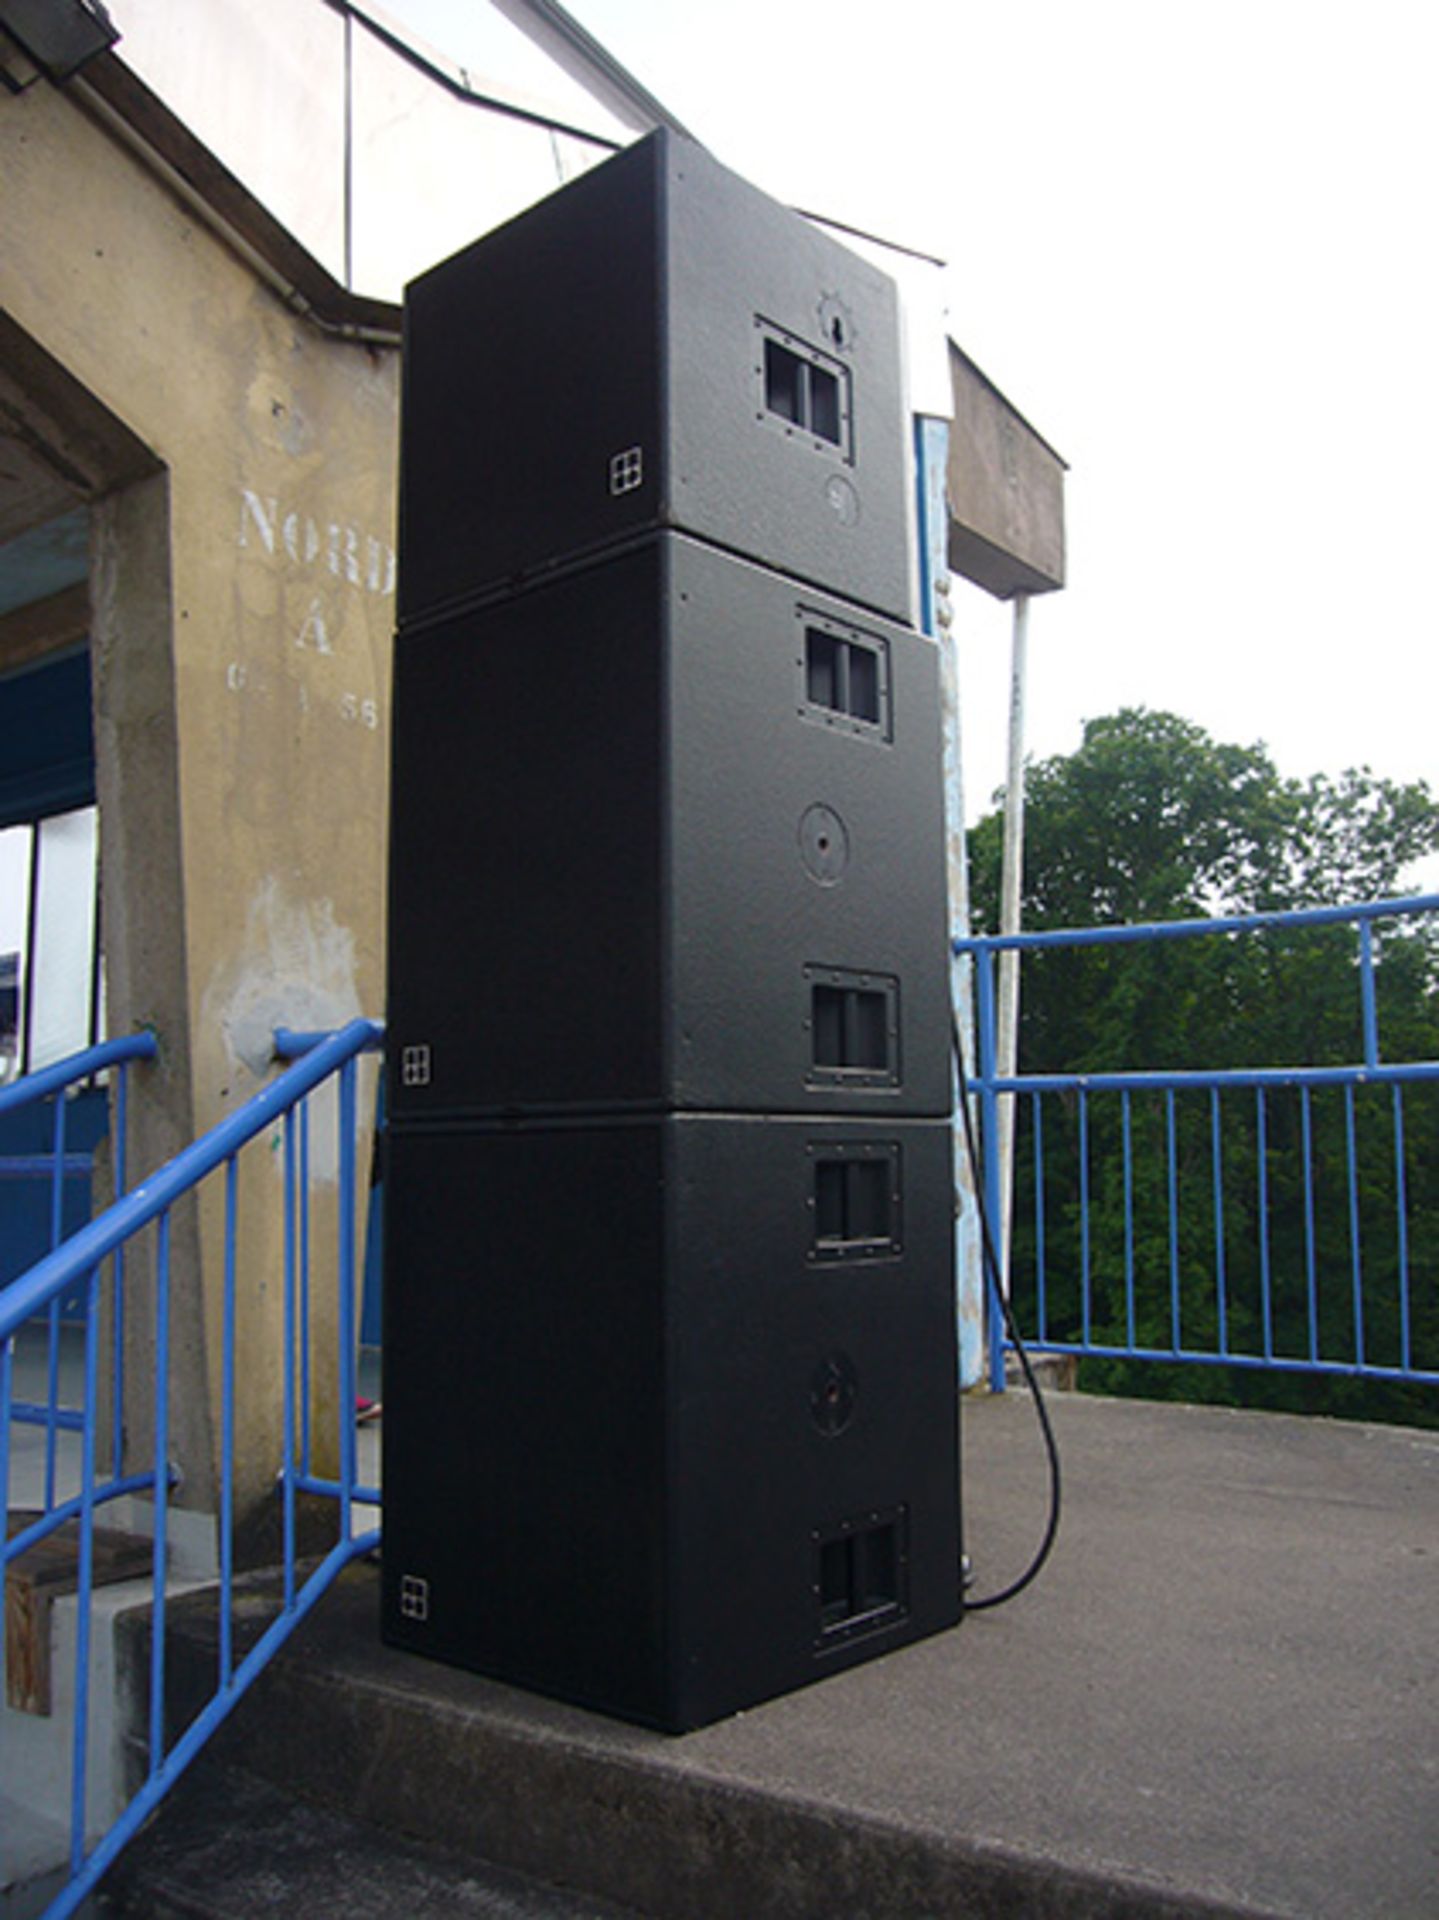 D and B Audiotechnik C7 Series Sound System with D12 Amplifiers, Racks and Cabling - Image 6 of 7